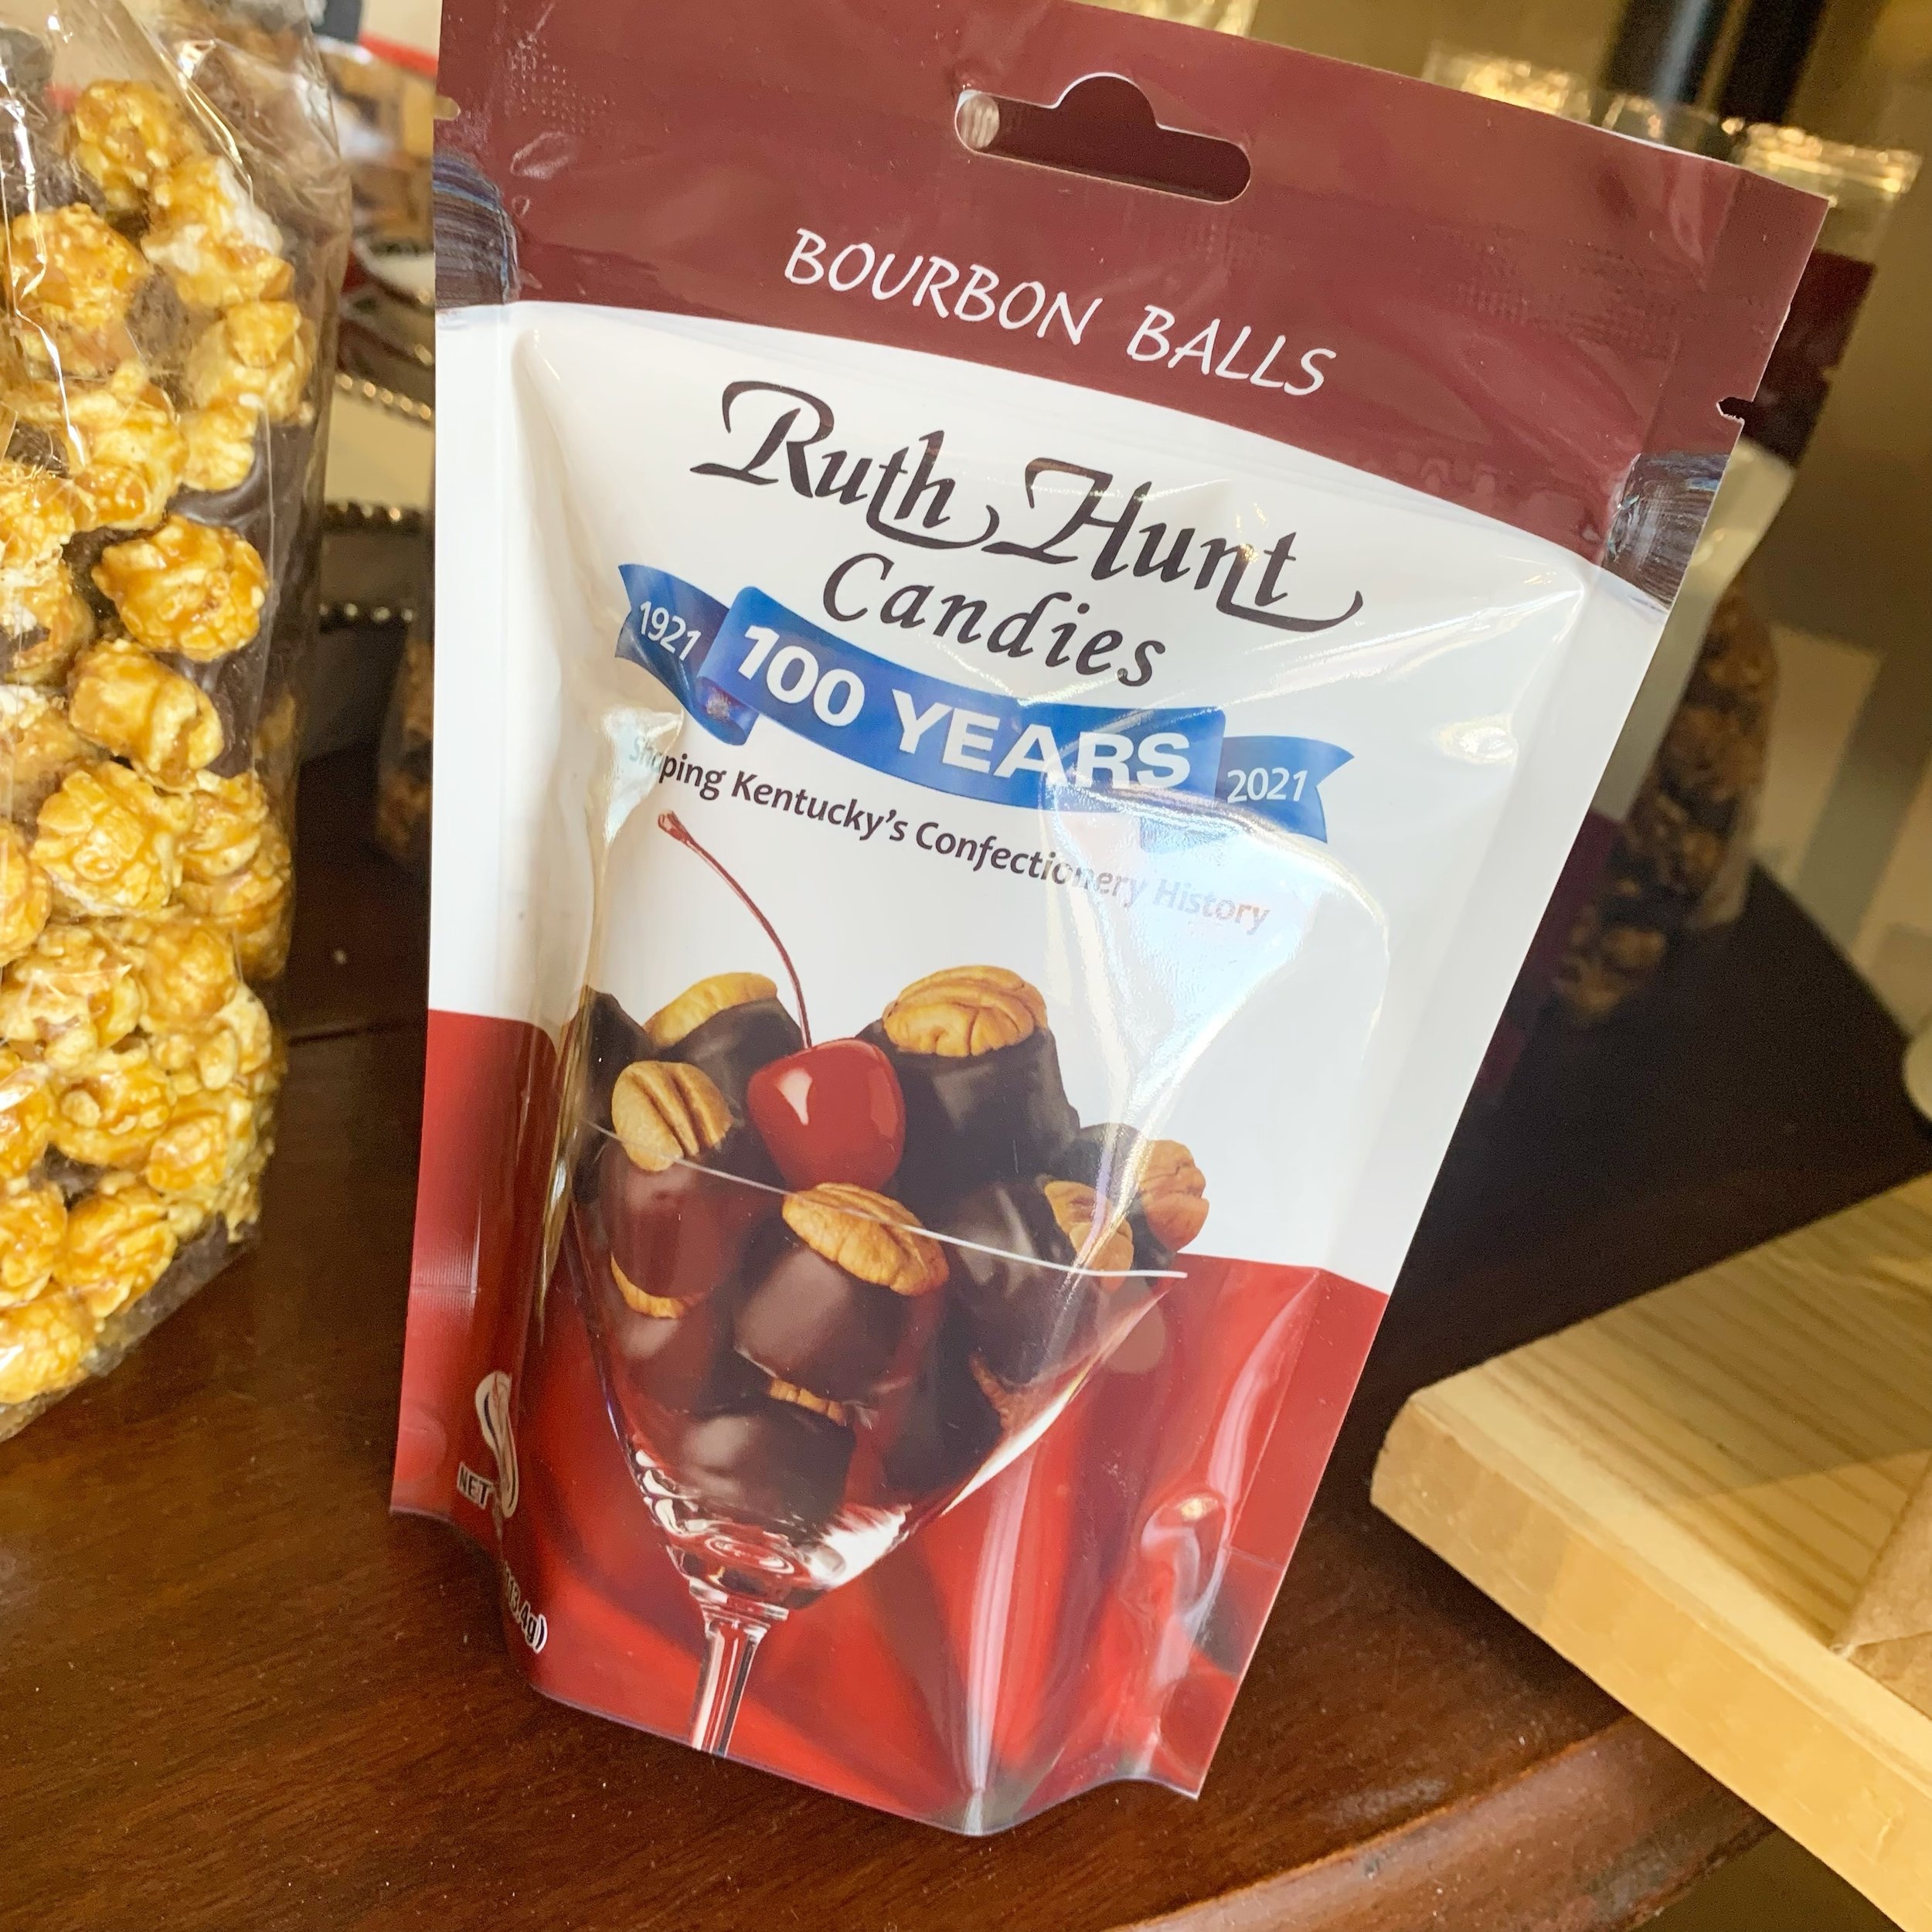 To@orrow is National Truffle Day! What better way to celebrant truffles AND the Kentucky Derby than with Ruth Hunt Bourbon Balls?! A must have at your Derby party 🐎 
Available at BAM! 

Give the best gift, host the best gathering, have the most fun.